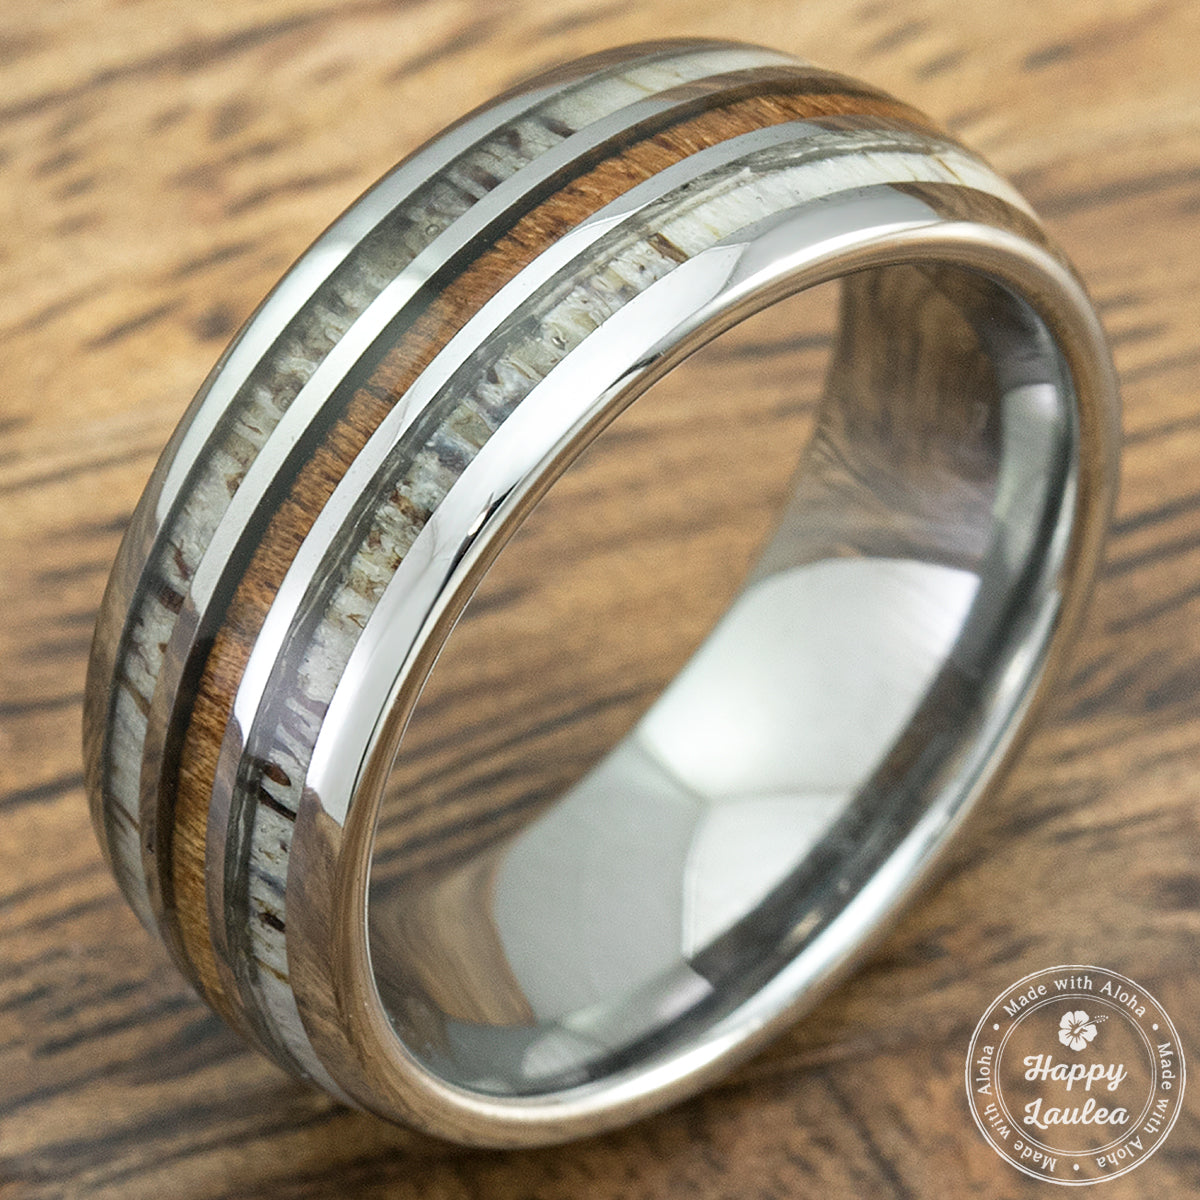 Tungsten Carbide Ring with Antler & Koa Wood Tri Inlay - 8mm, Dome Shape, Comfort Fitment